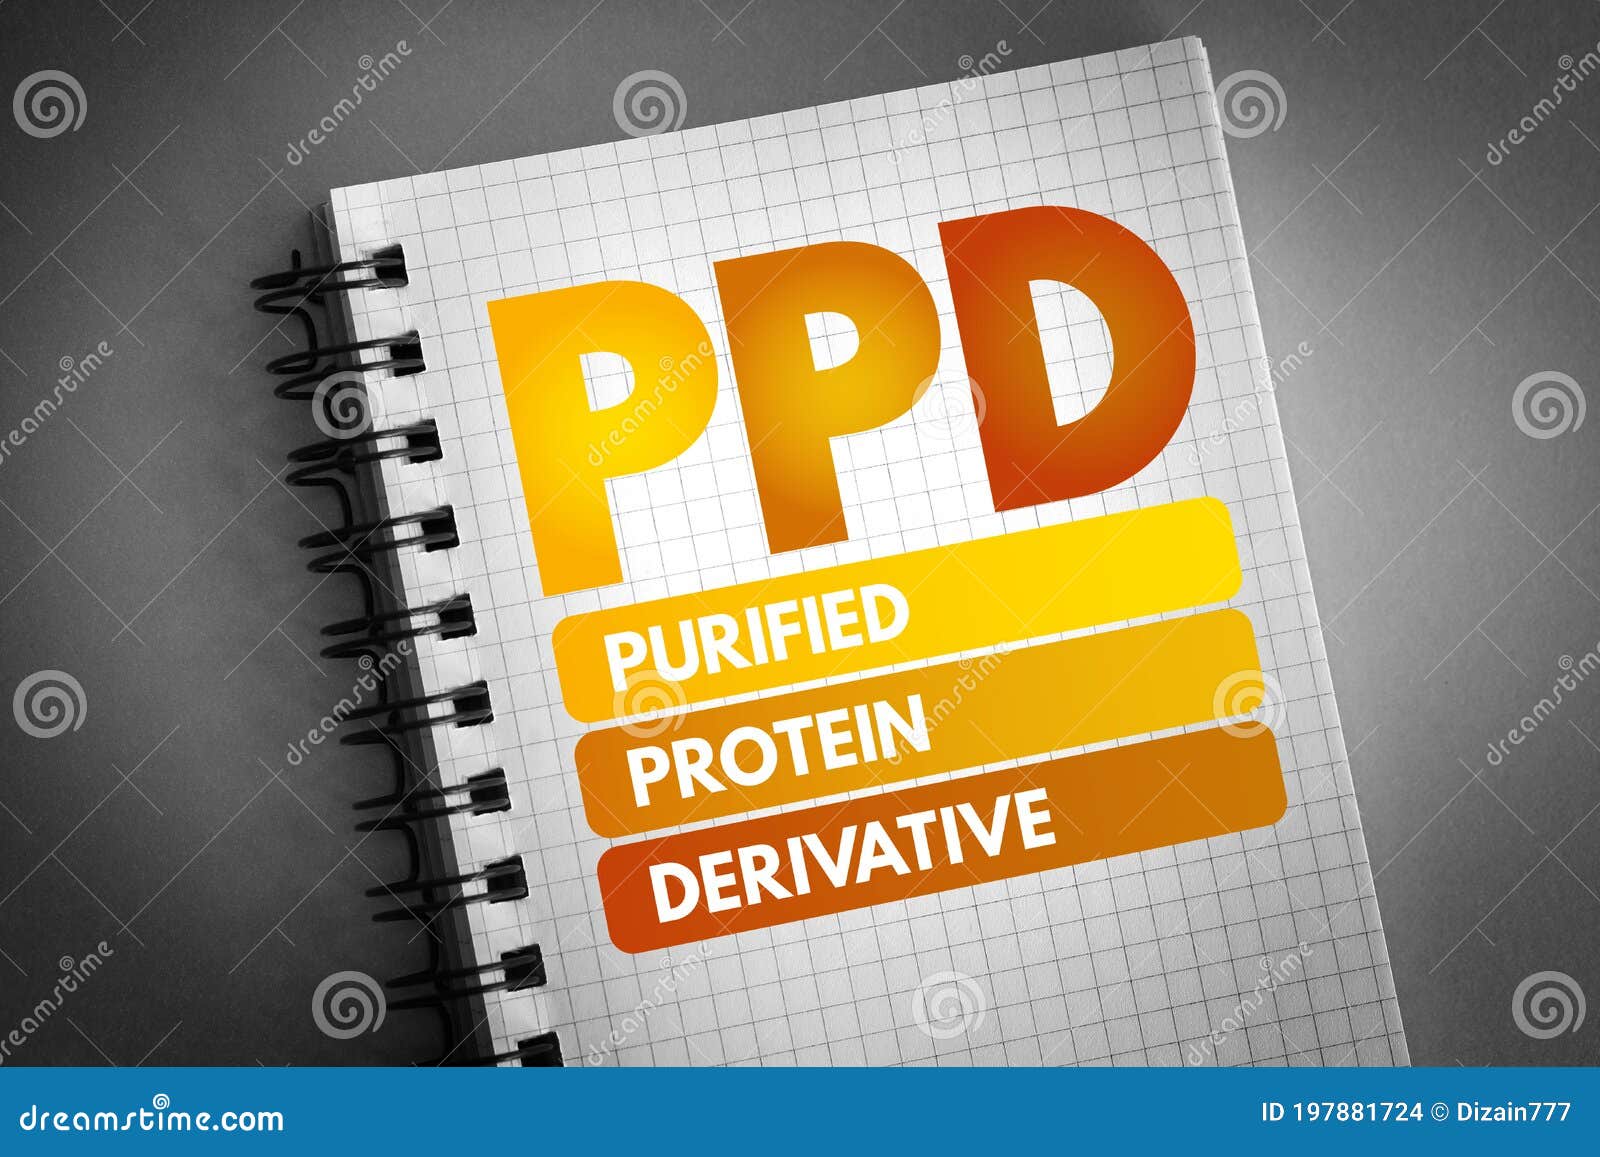 ppd - purified protein derivative acronym